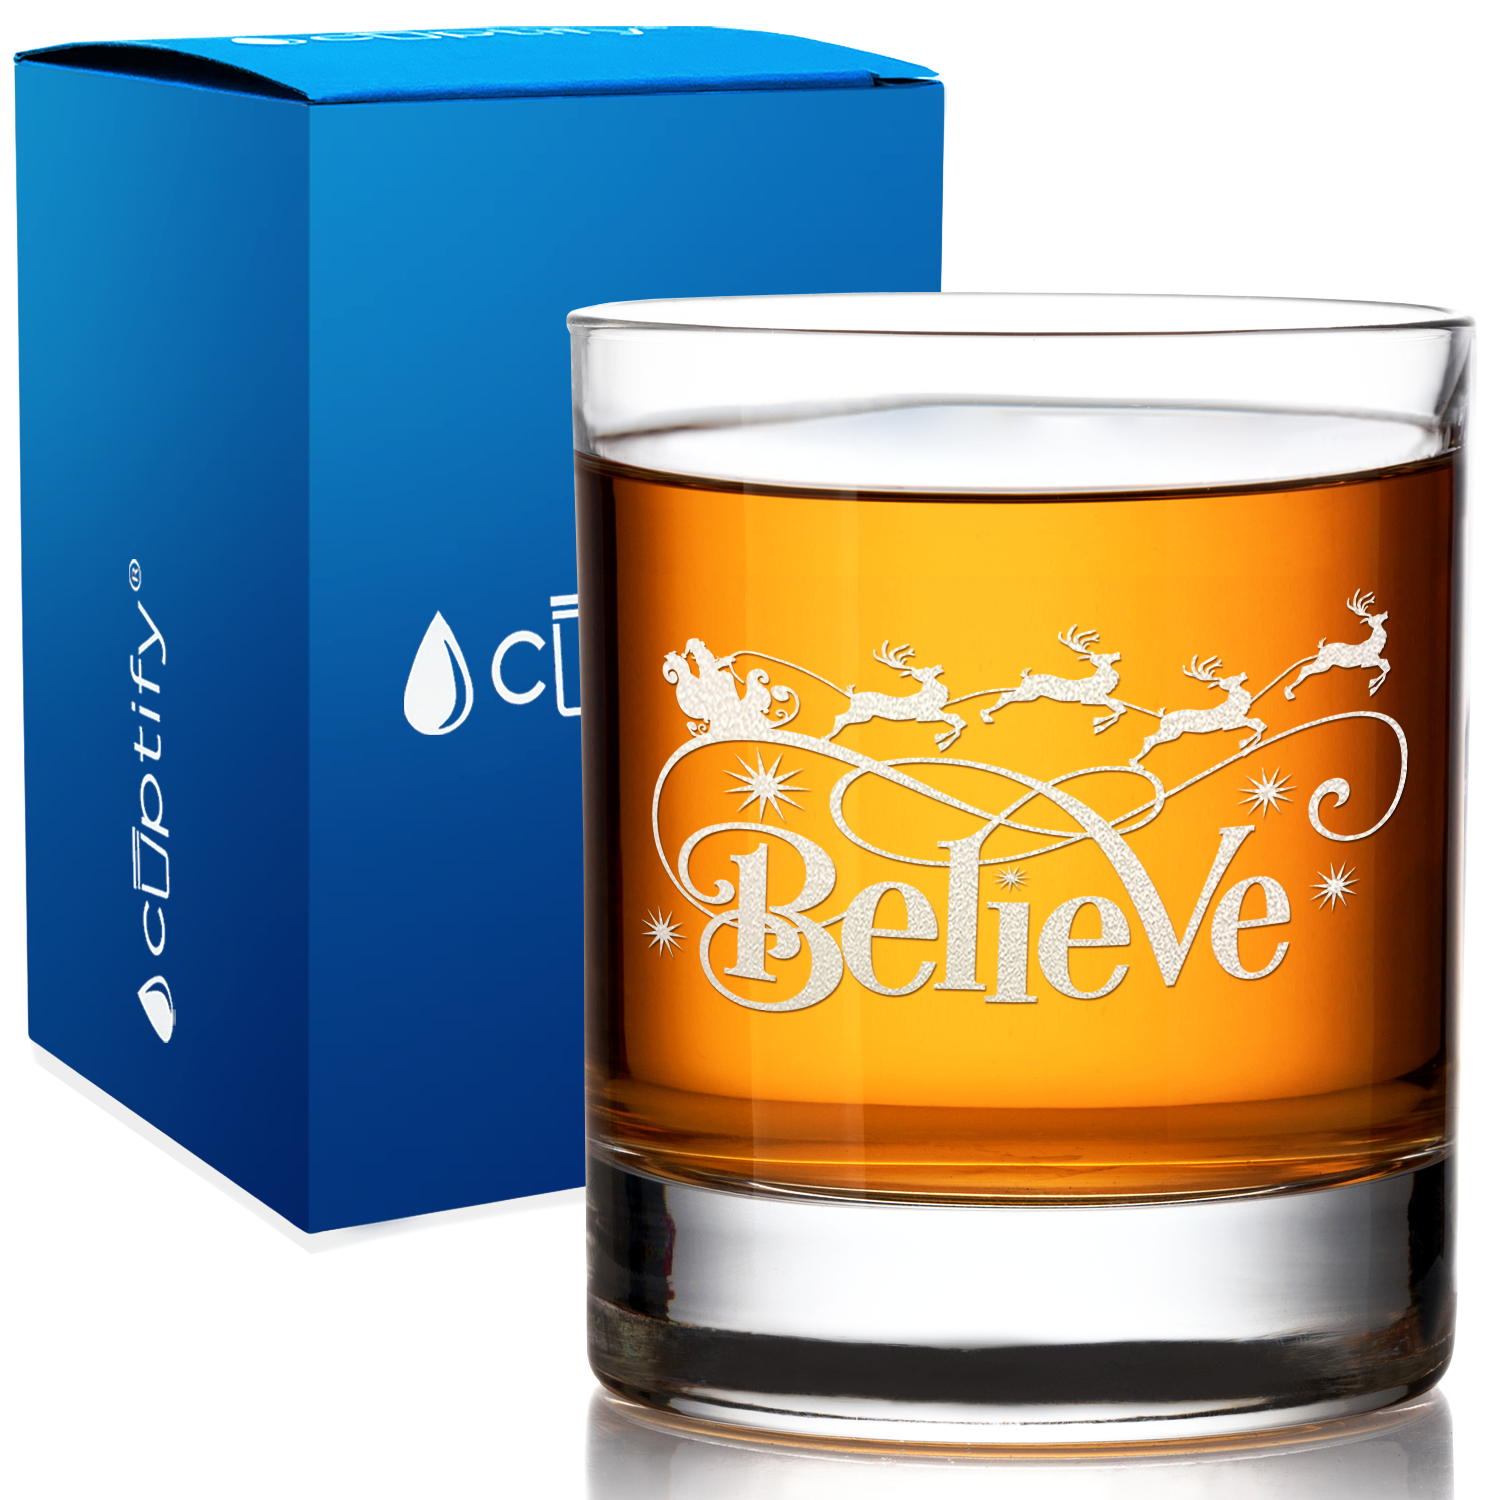 Believe in Stanta on 10.25 oz Old Fashioned Glass